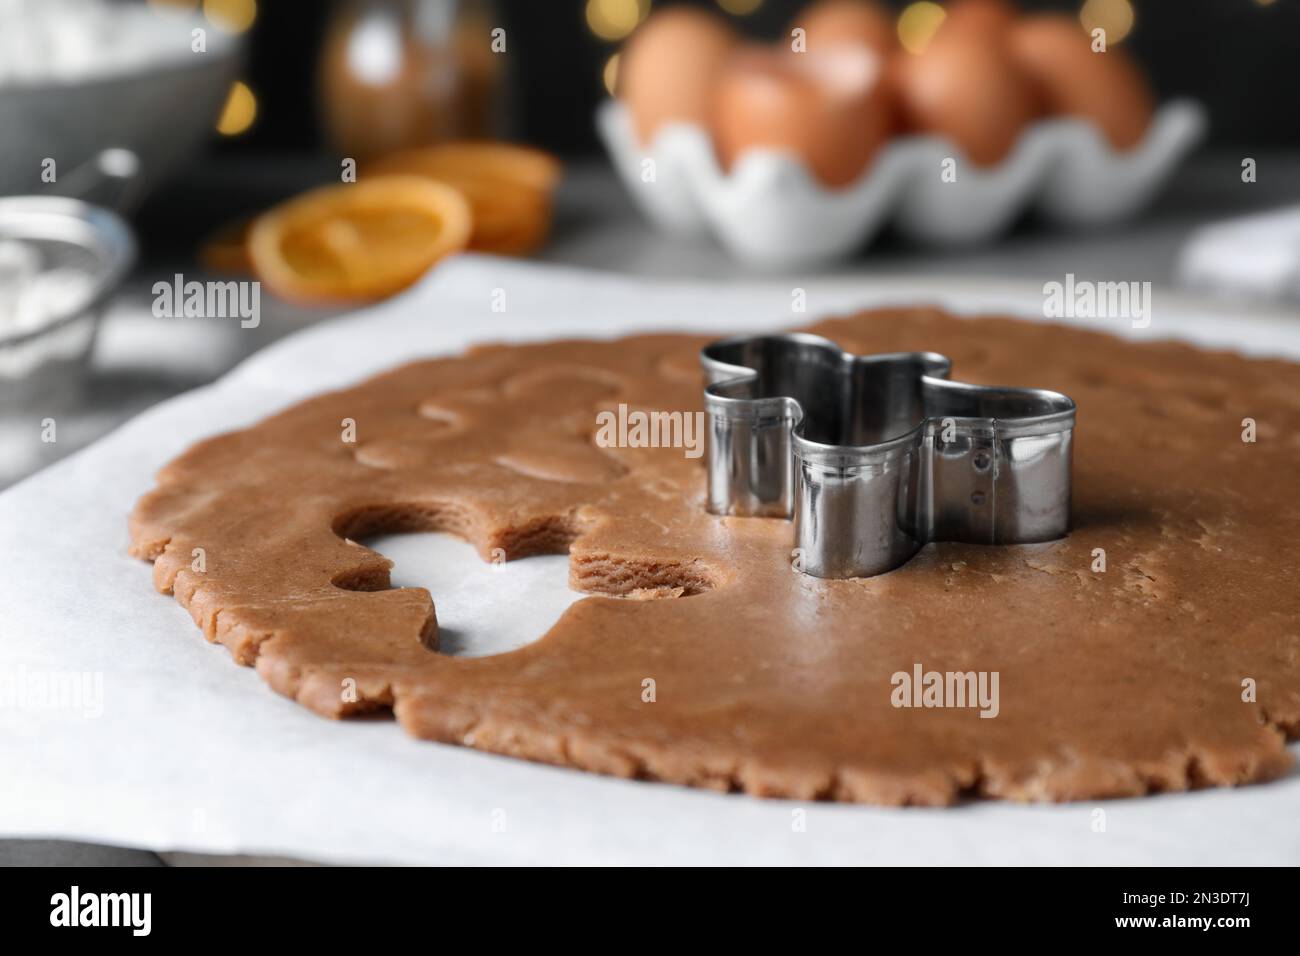 Making homemade Christmas cookies. Dough for gingerbread man and cutter on parchment, closeup Stock Photo